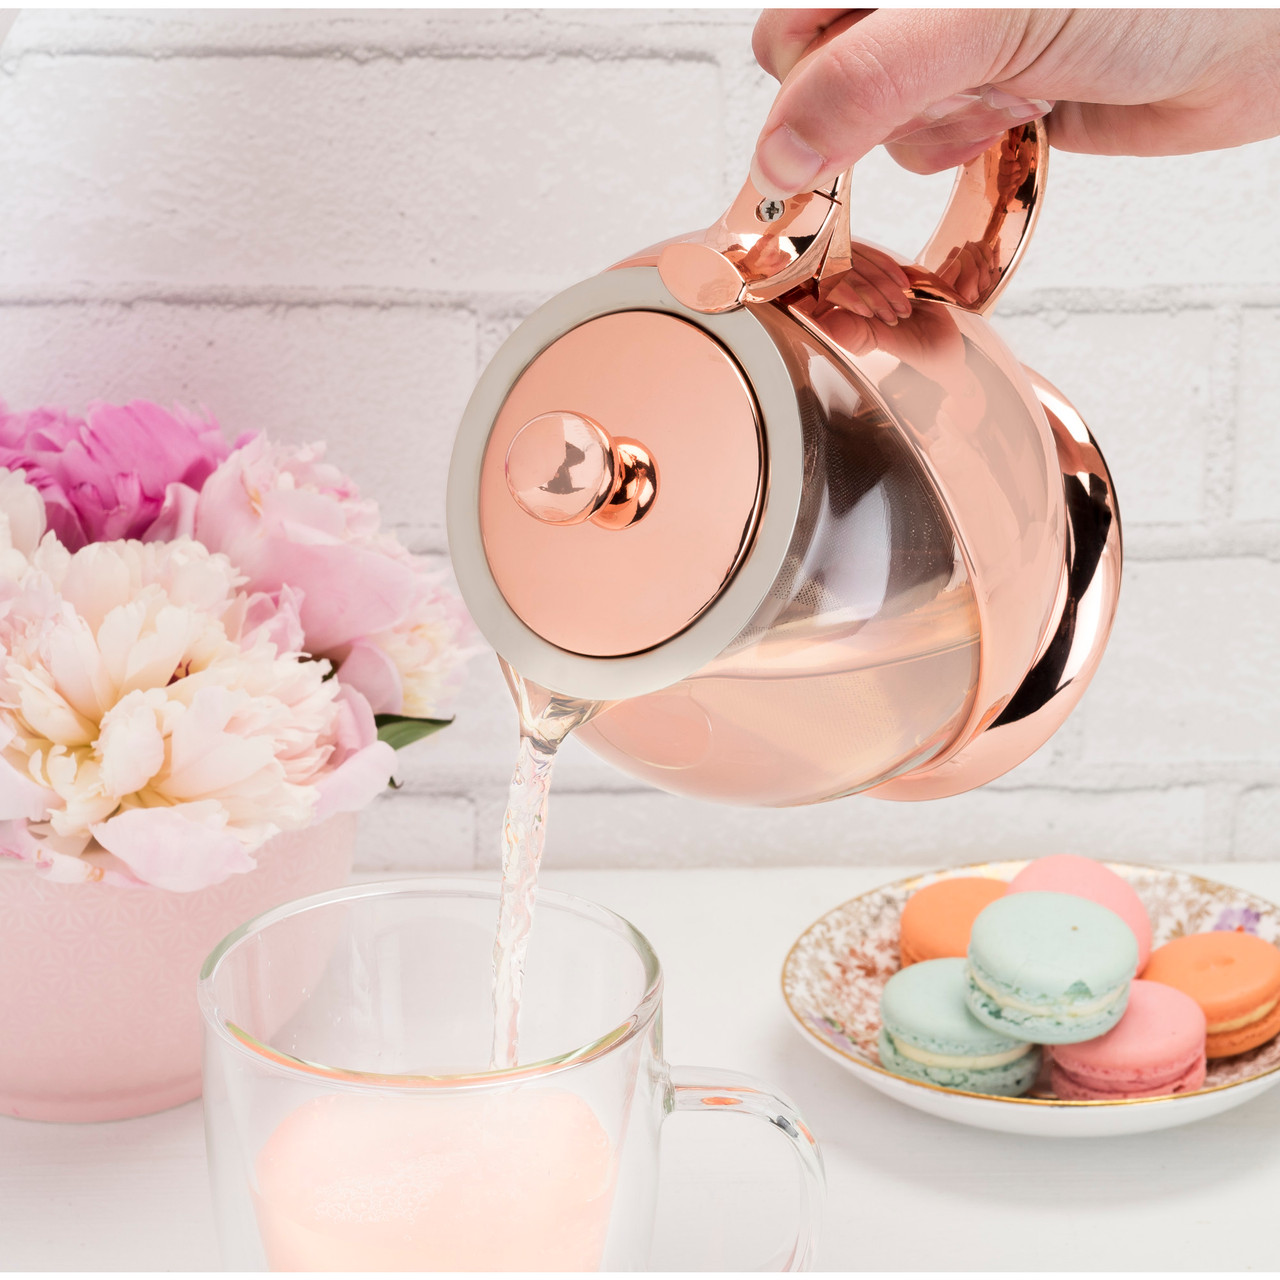 Shelby Glass and Rose Gold Wrapped Teapot by Pinky Up